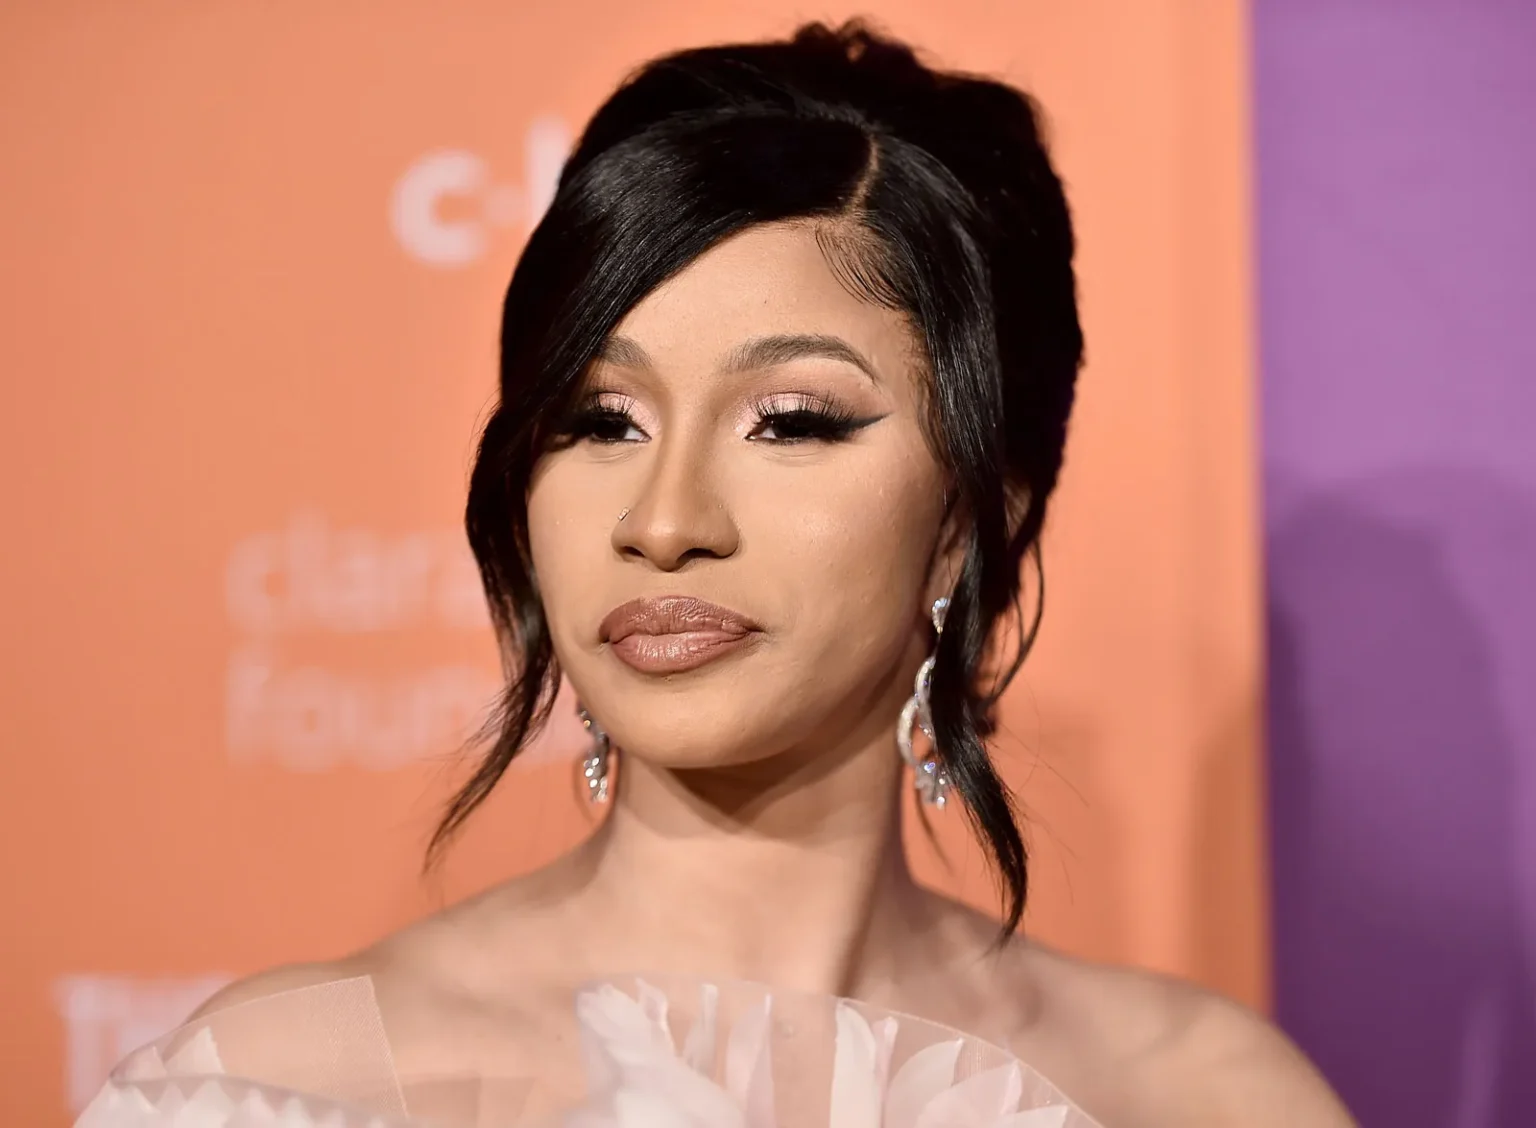 cardi-b-wants-to-start-fresh-after-ditching-her-counterparts